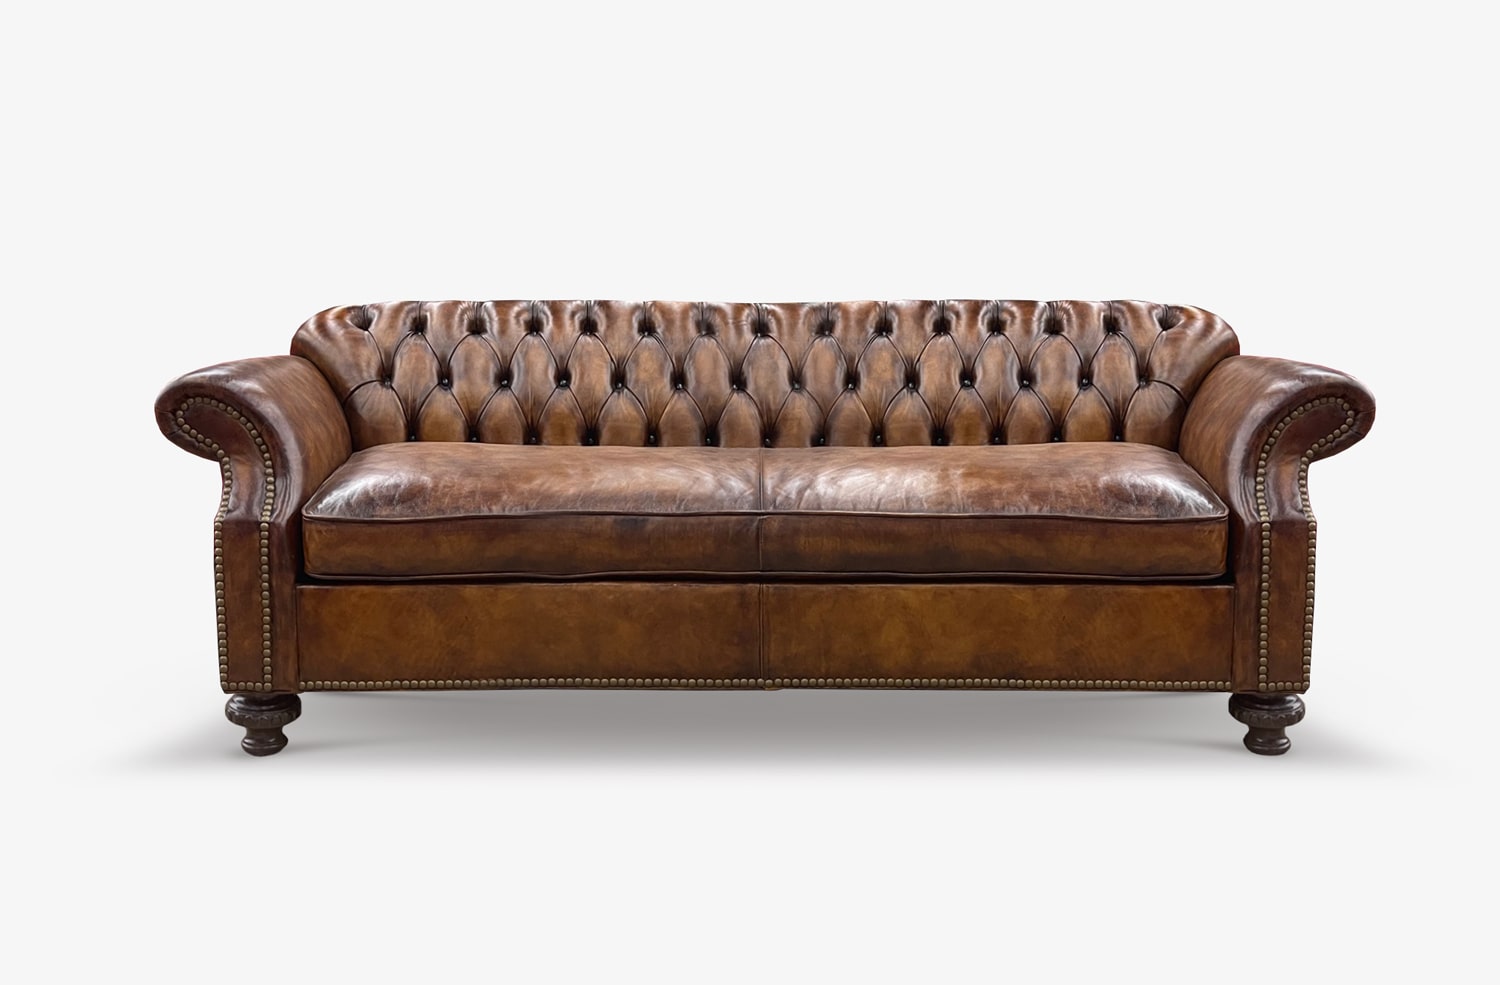 Whitman Hand-Stained Topaz Brown Leather Chesterfield American Made Sofa